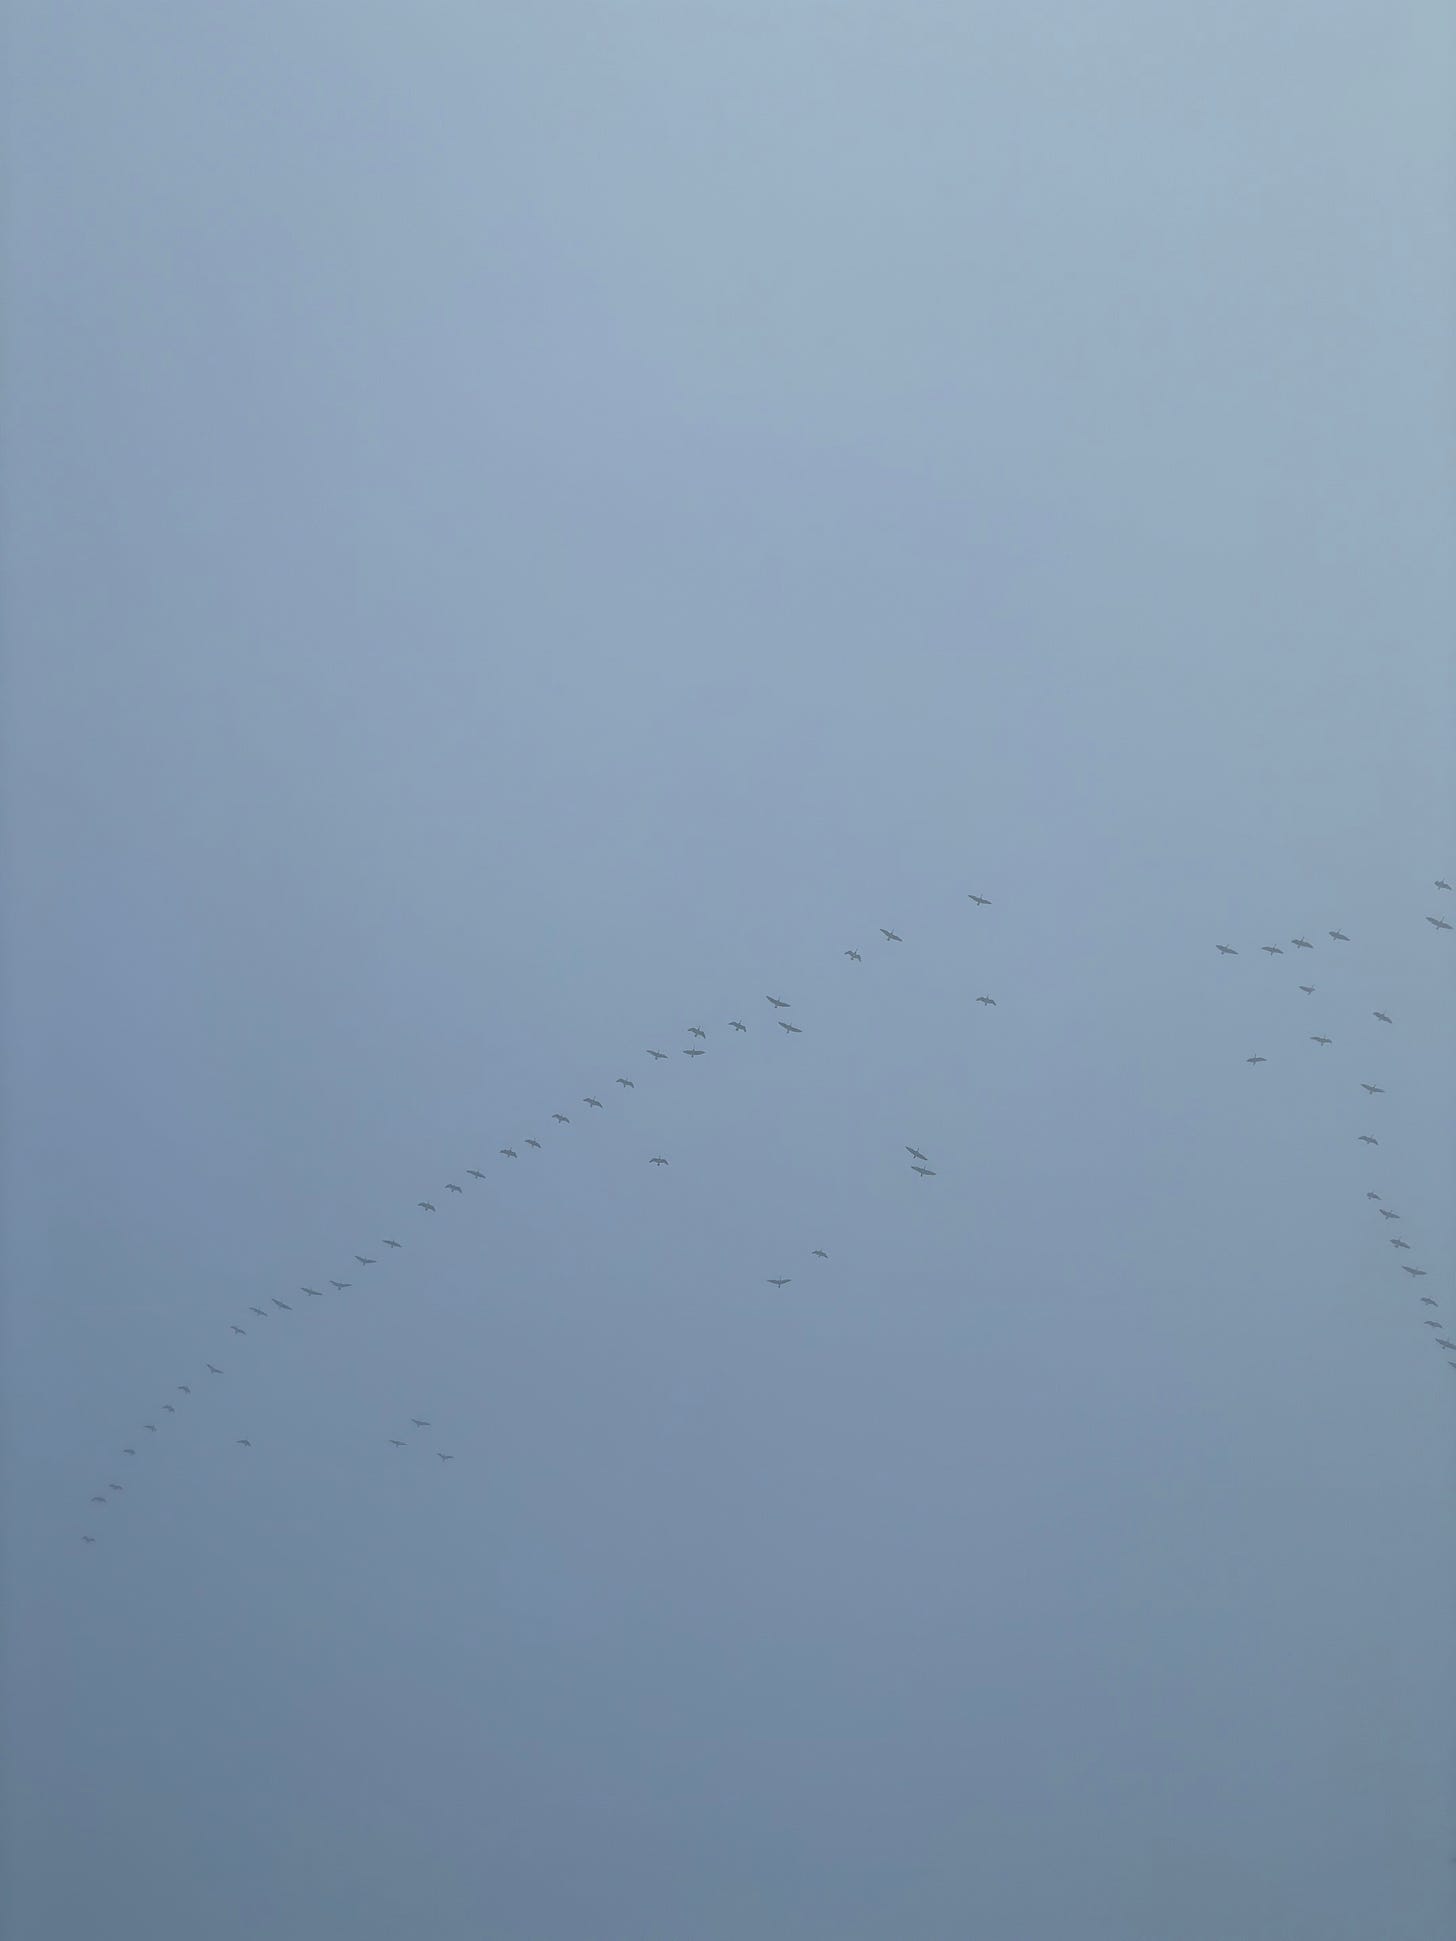 A vee of Canada geese in a blue-gray sky